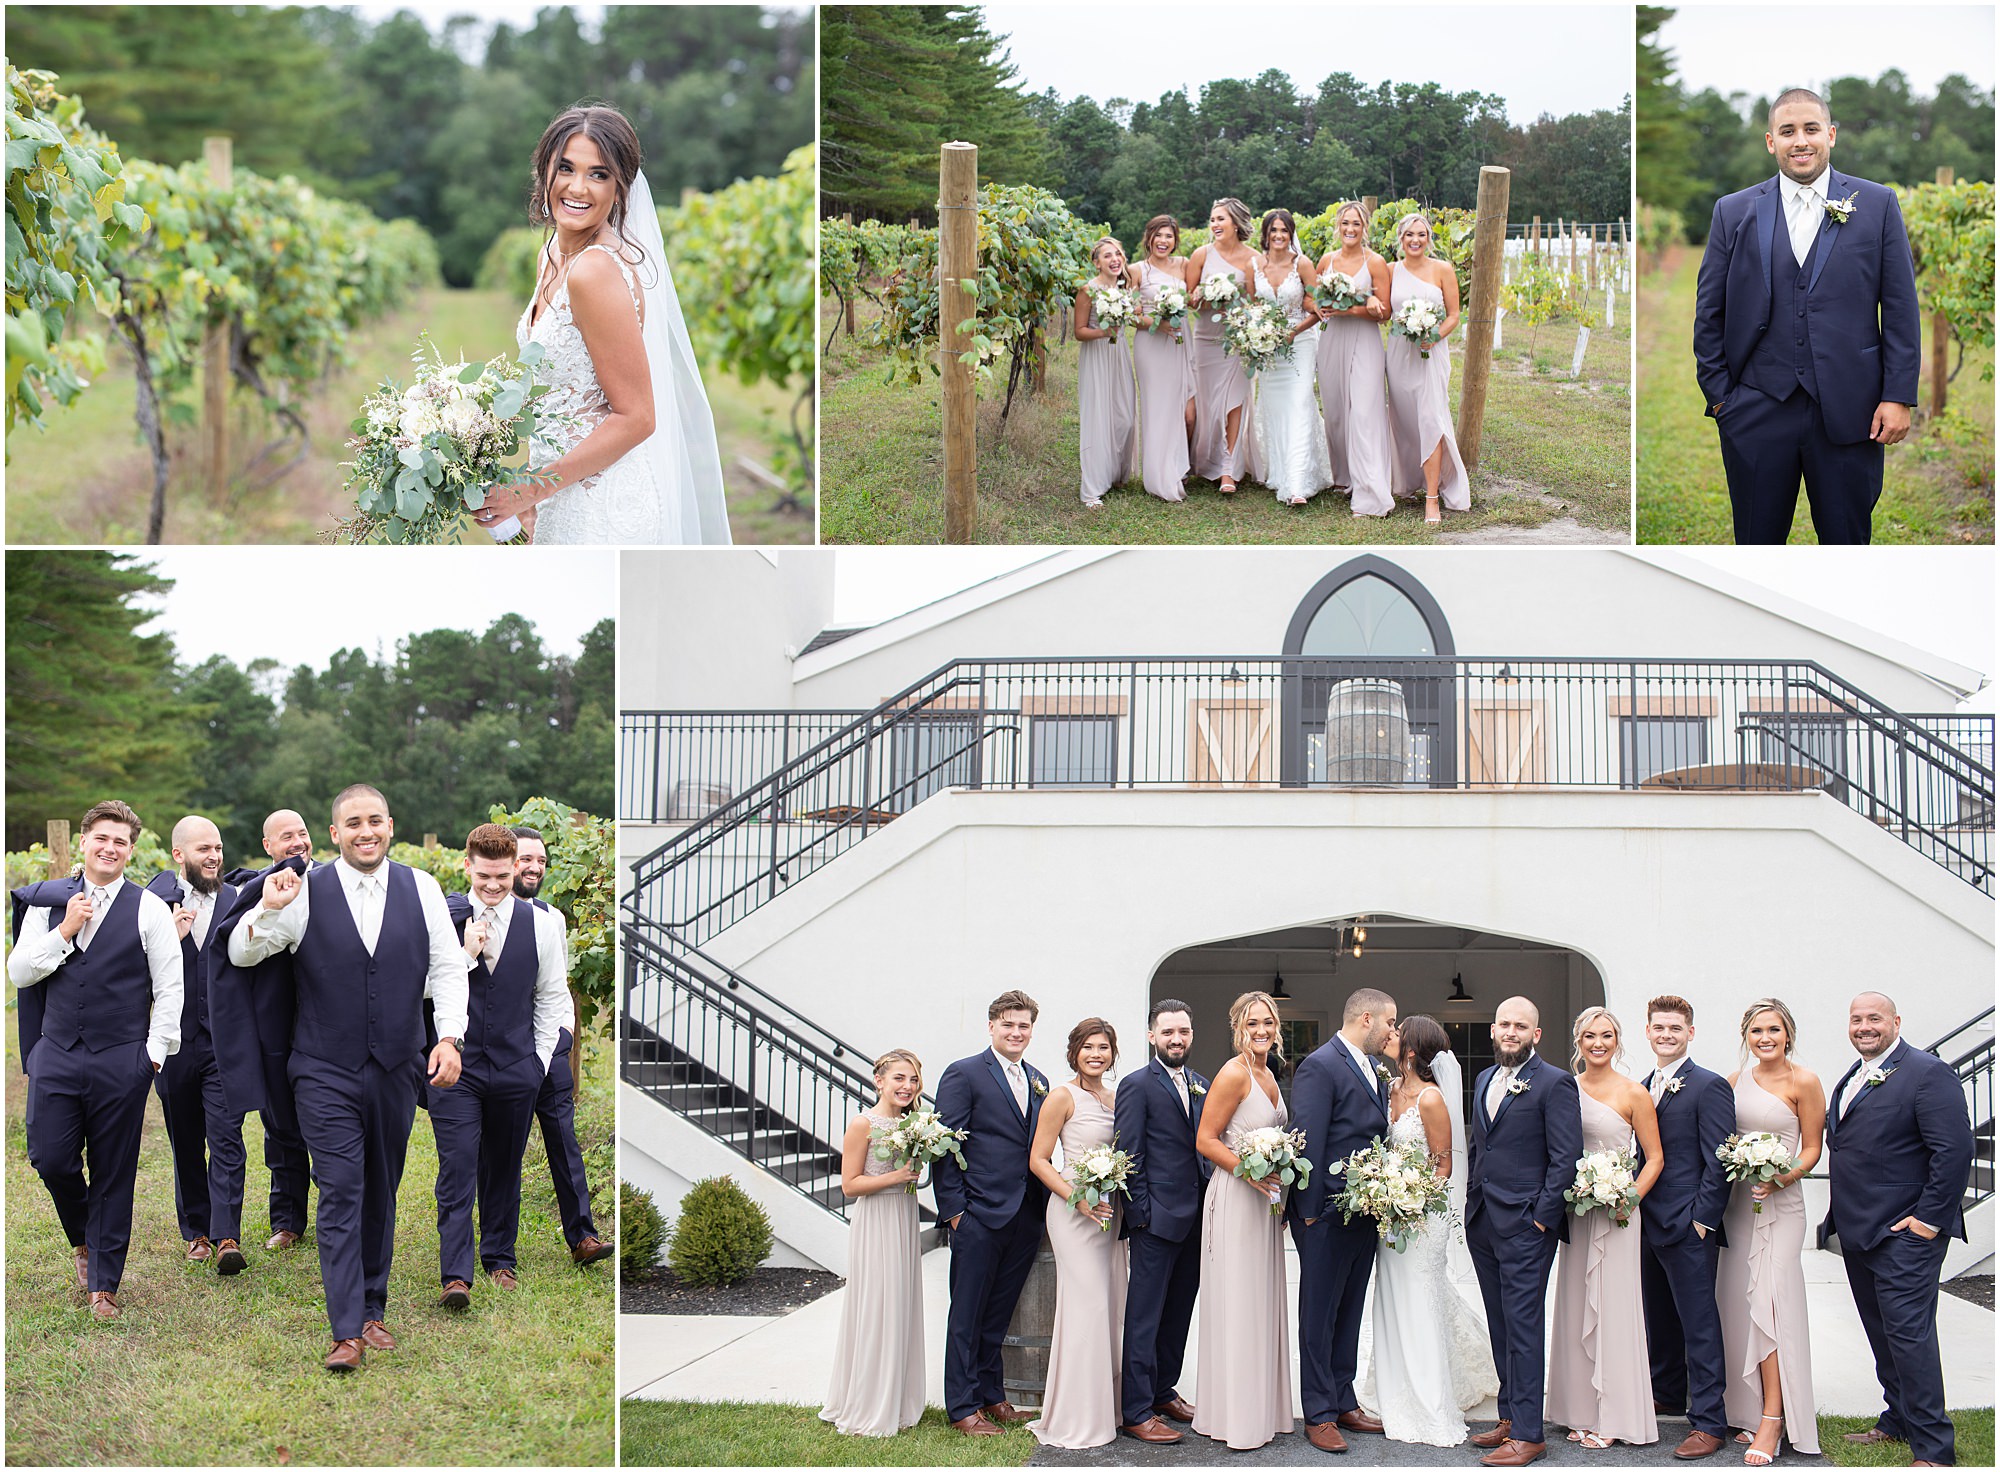 Renault Winery in Egg Harbor is one of the best Wedding Venues in South Jersey and is perfect for a wedding no matter the season. 